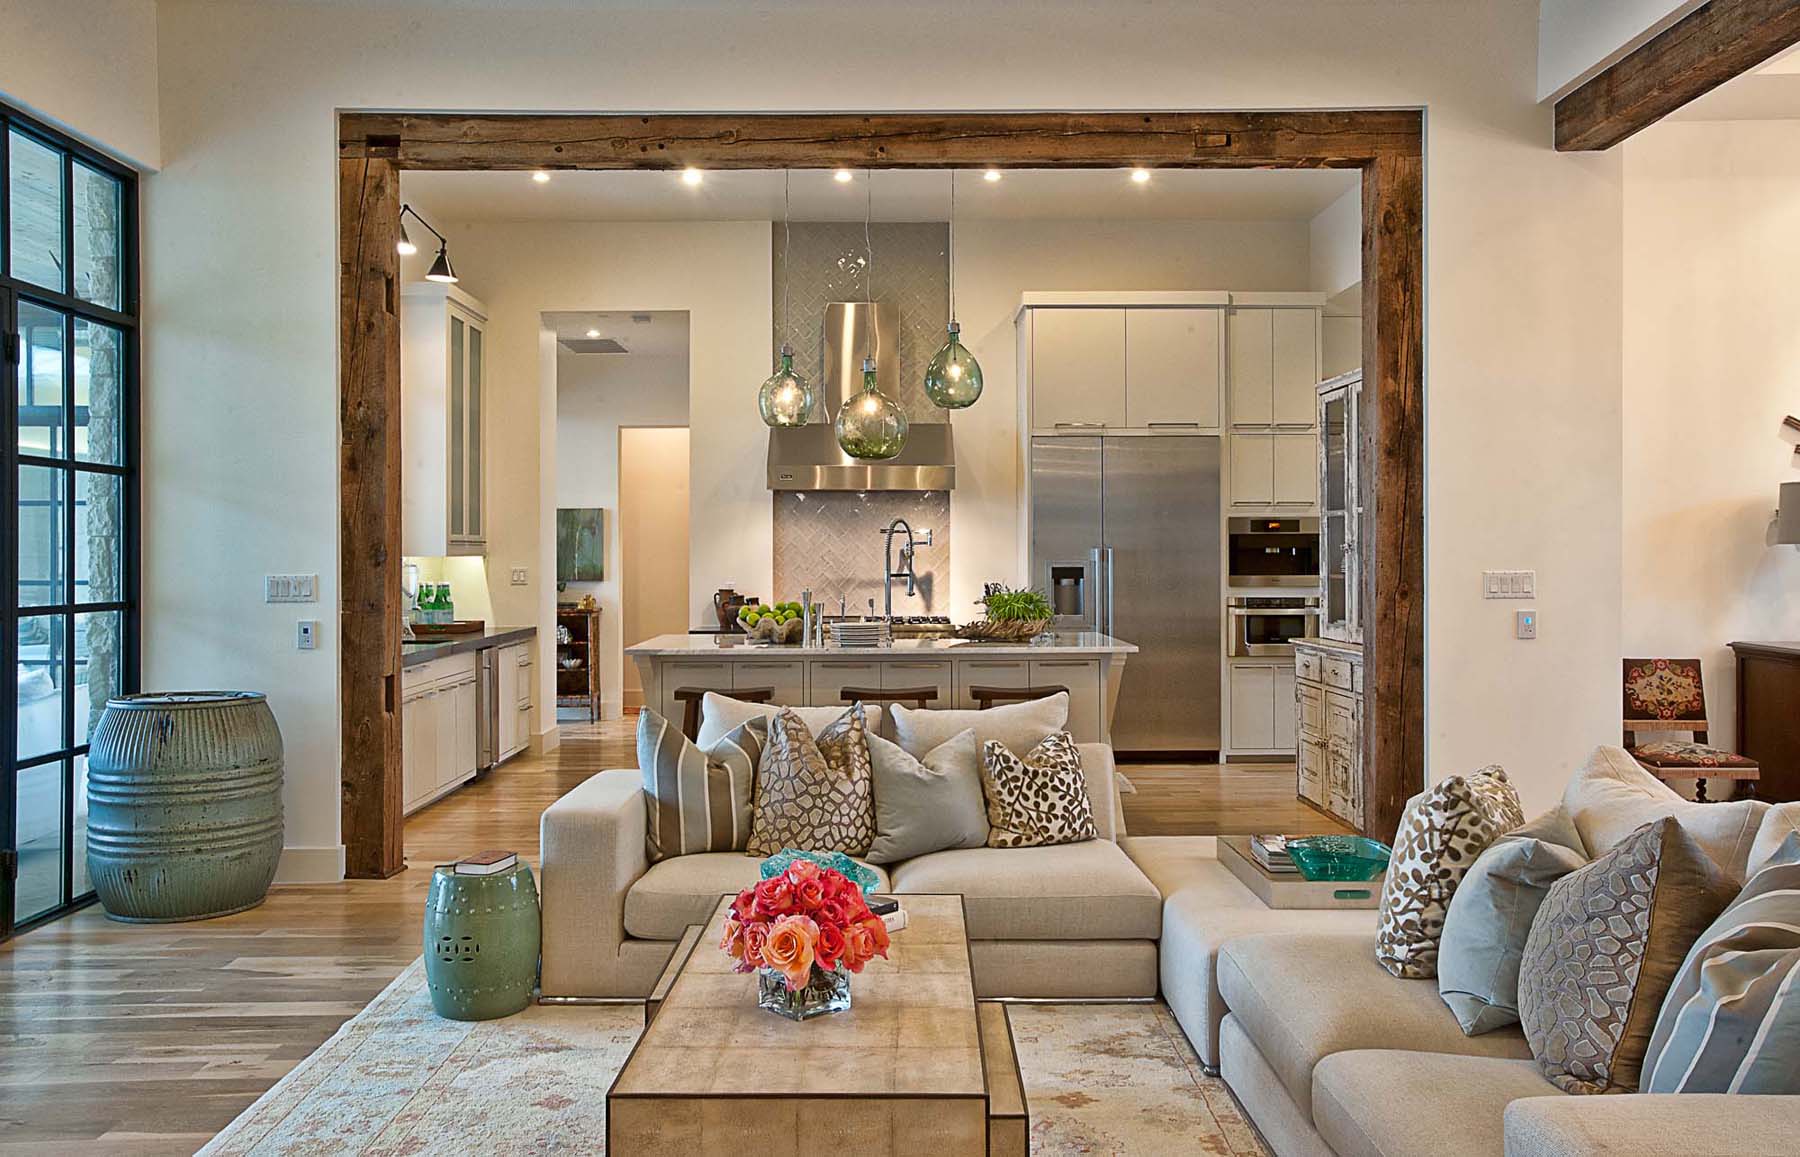 A Contemporary Home With Rustic Elements Connects To Its ...